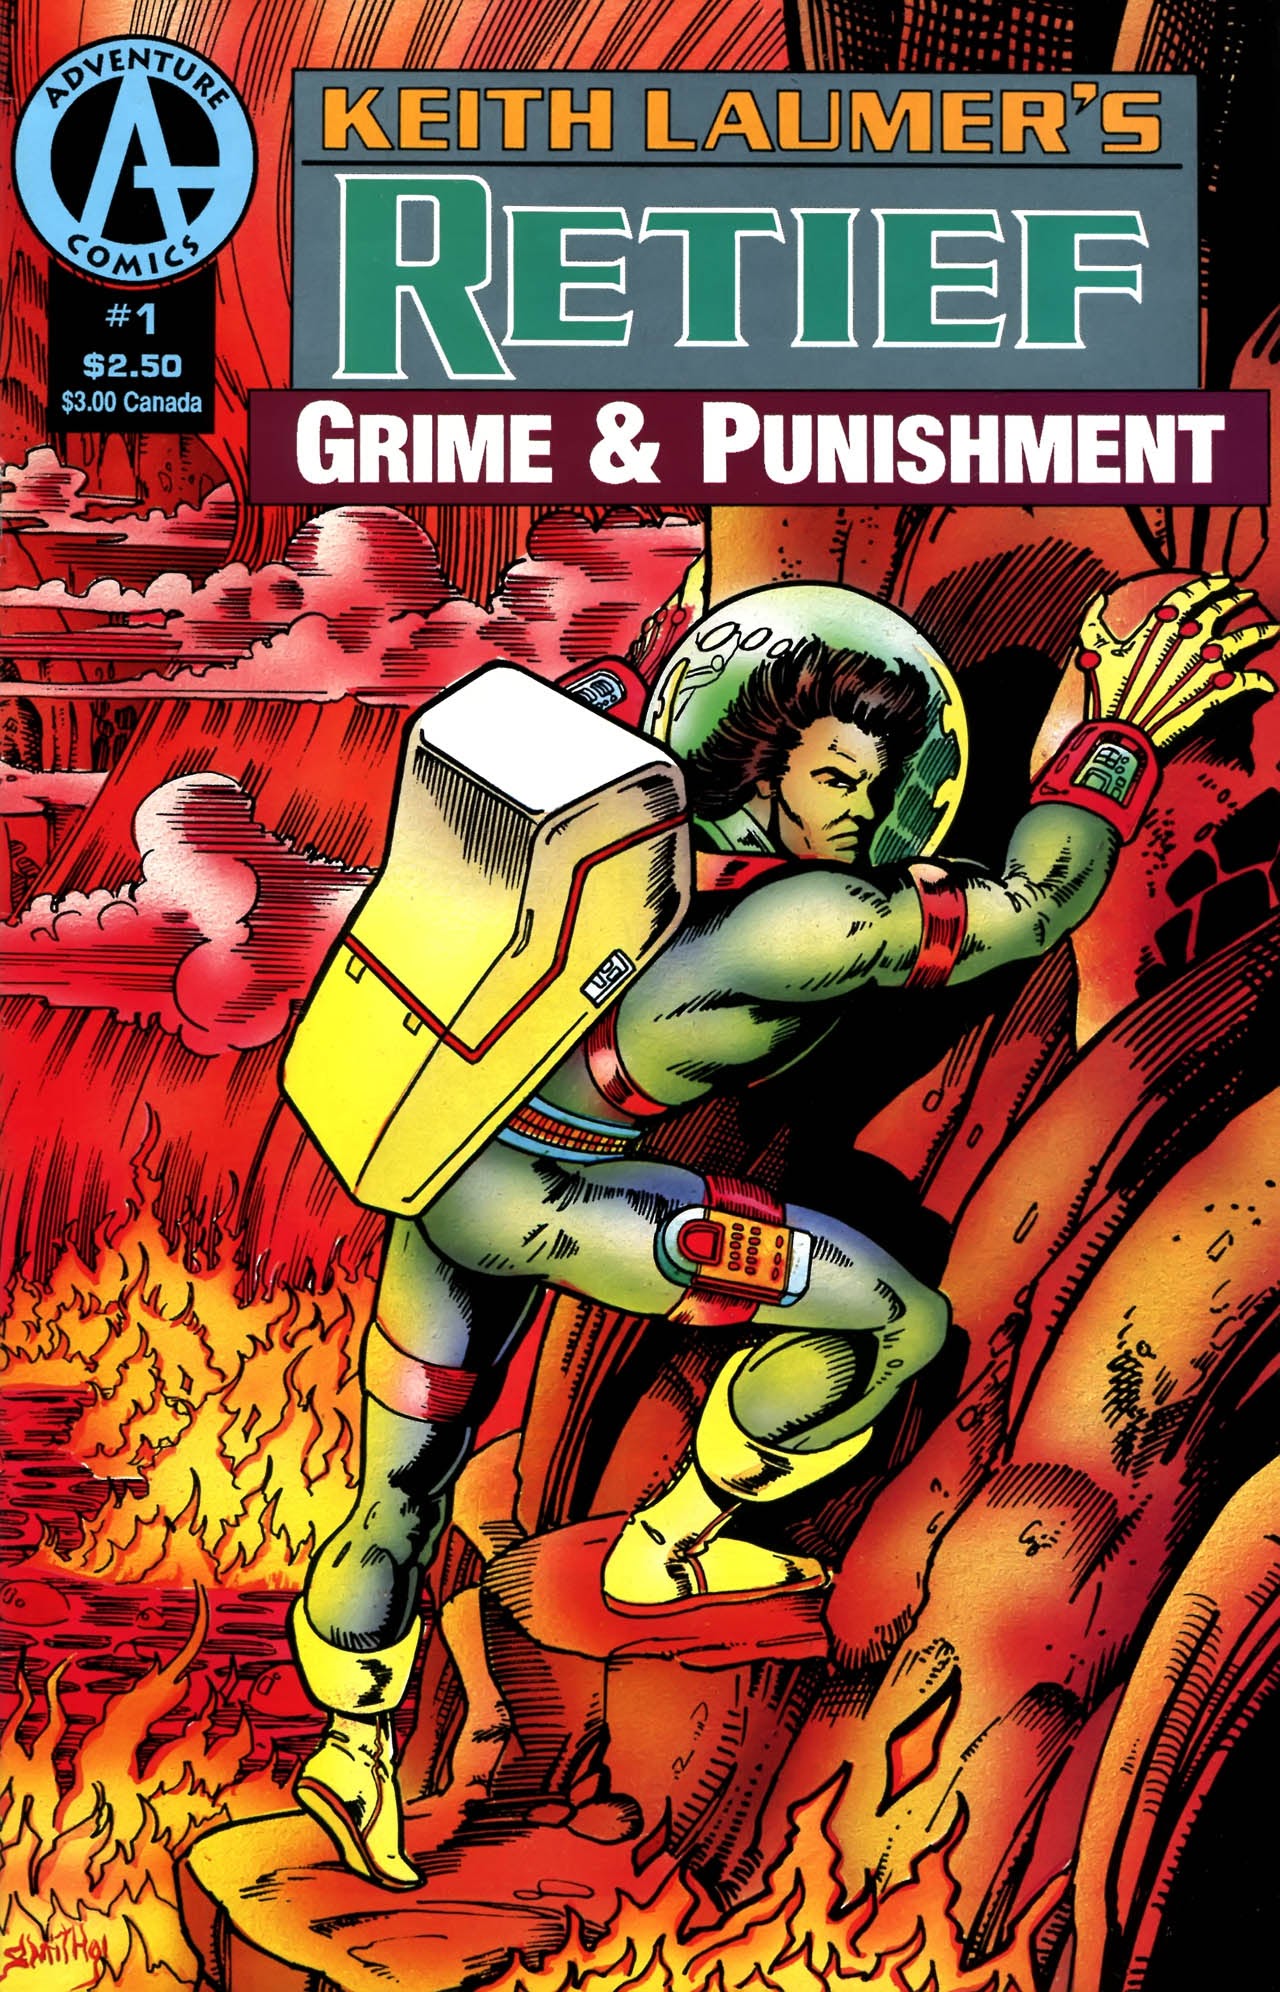 Read online Retief: Grime and Punishment comic -  Issue # Full - 1